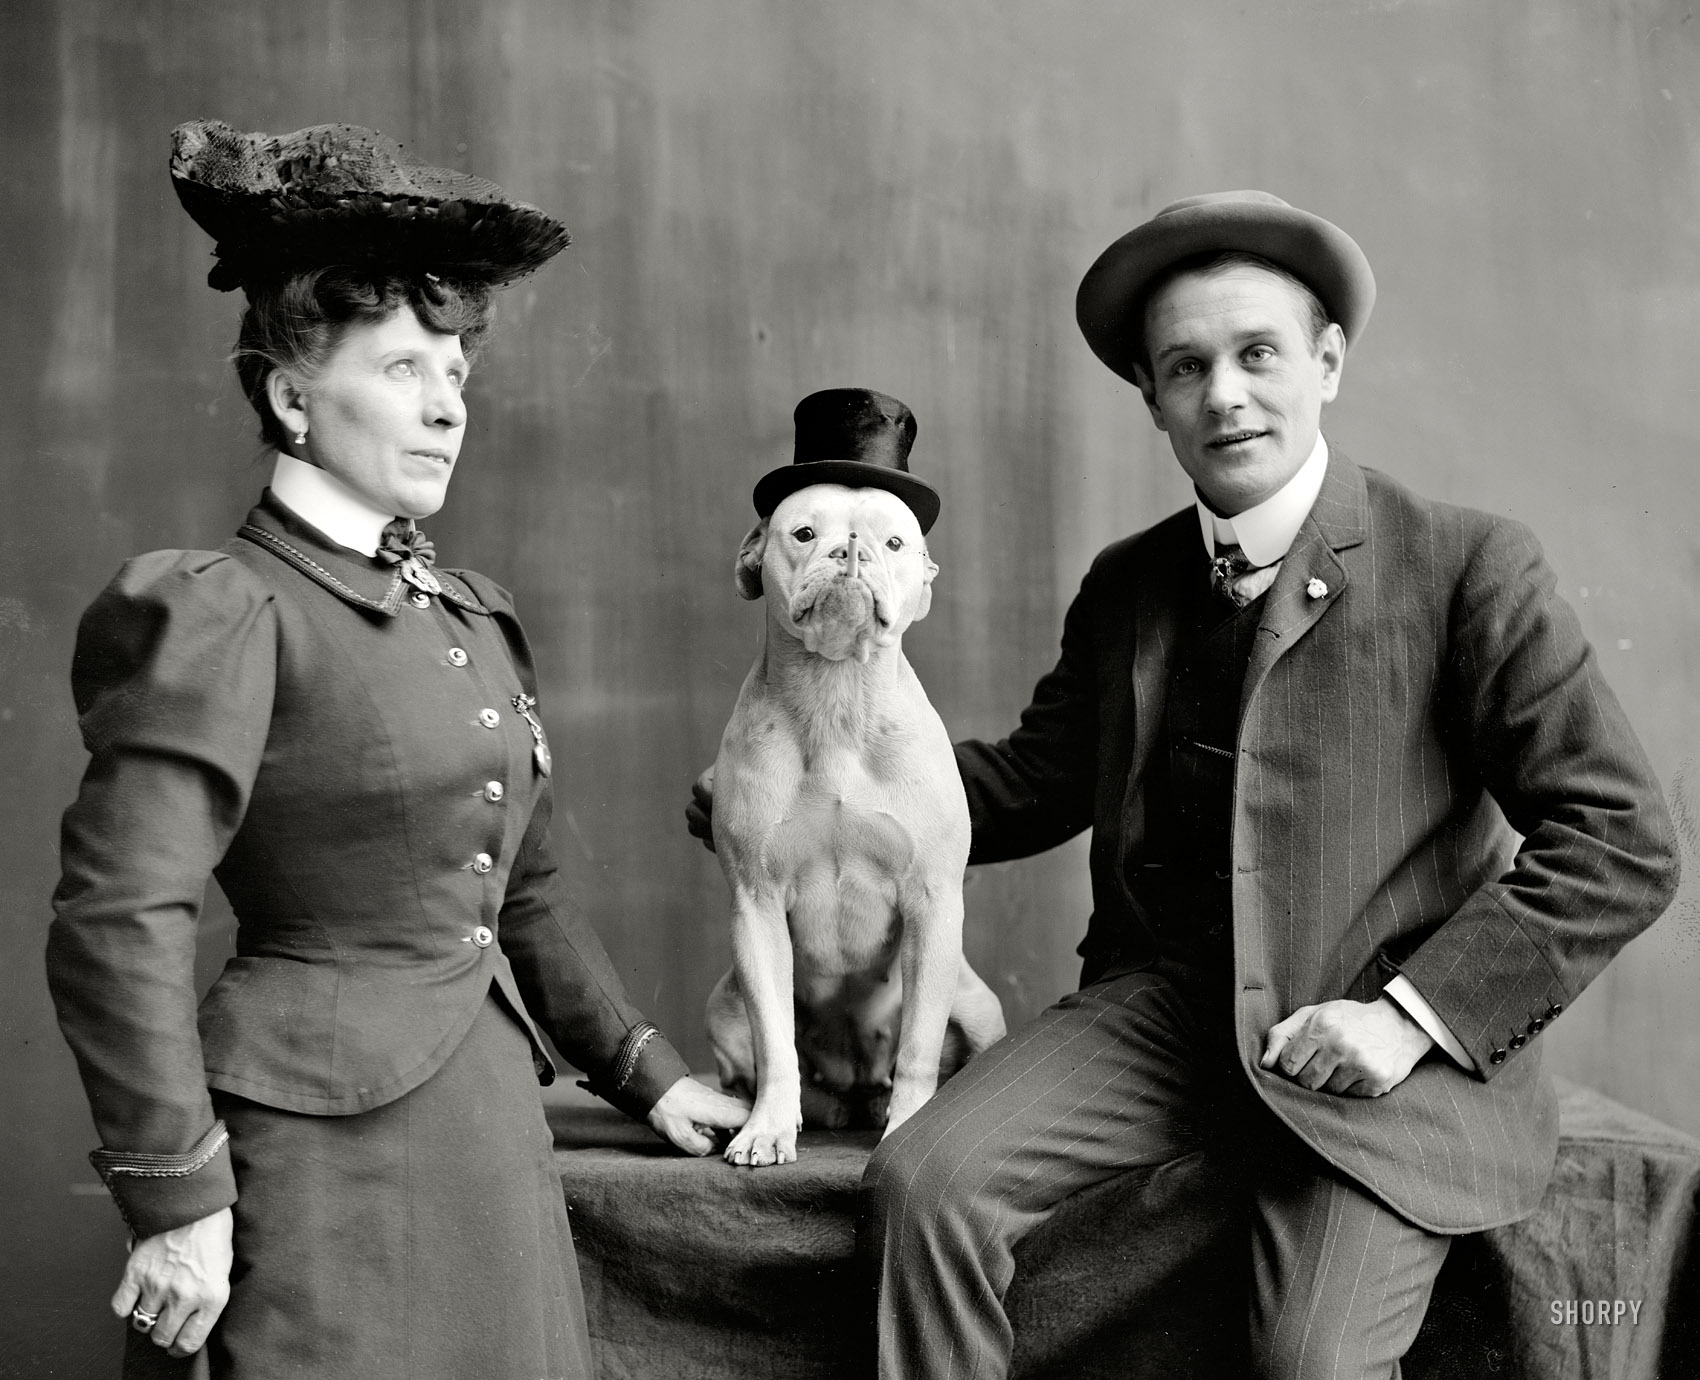 Circa 1908. "Mr. and Mrs. Frank Kern and trained dog Bobbie." 8x10 inch dry plate glass negative, Detroit Publishing Company. View full size.